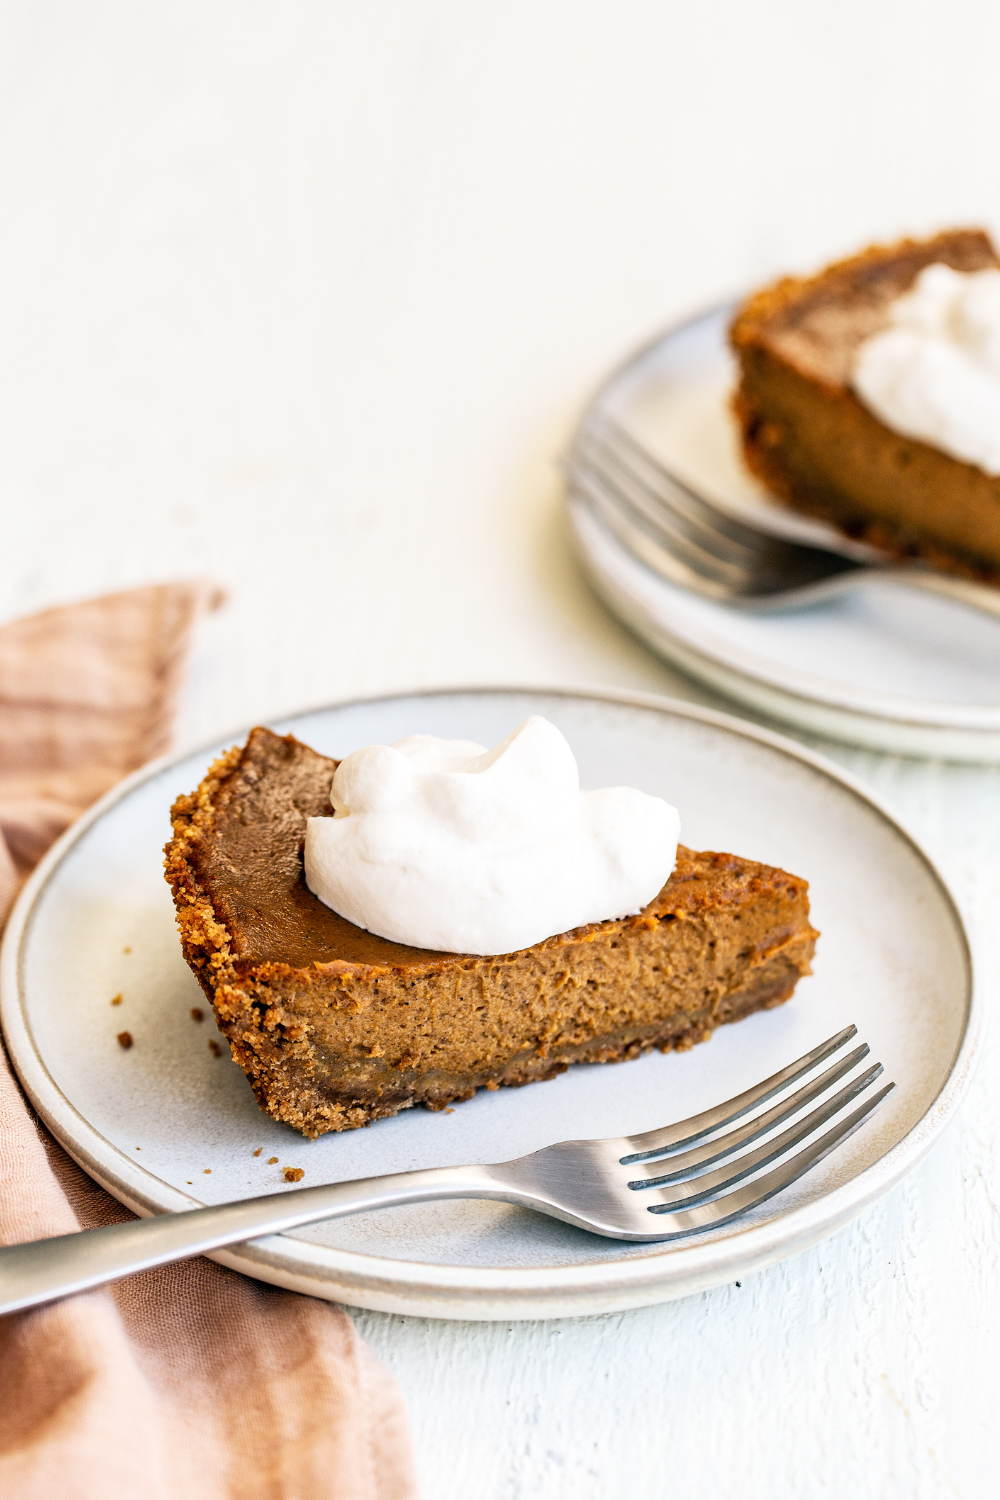 two slices of pumpkin pie with whipped cream on top, on plates,